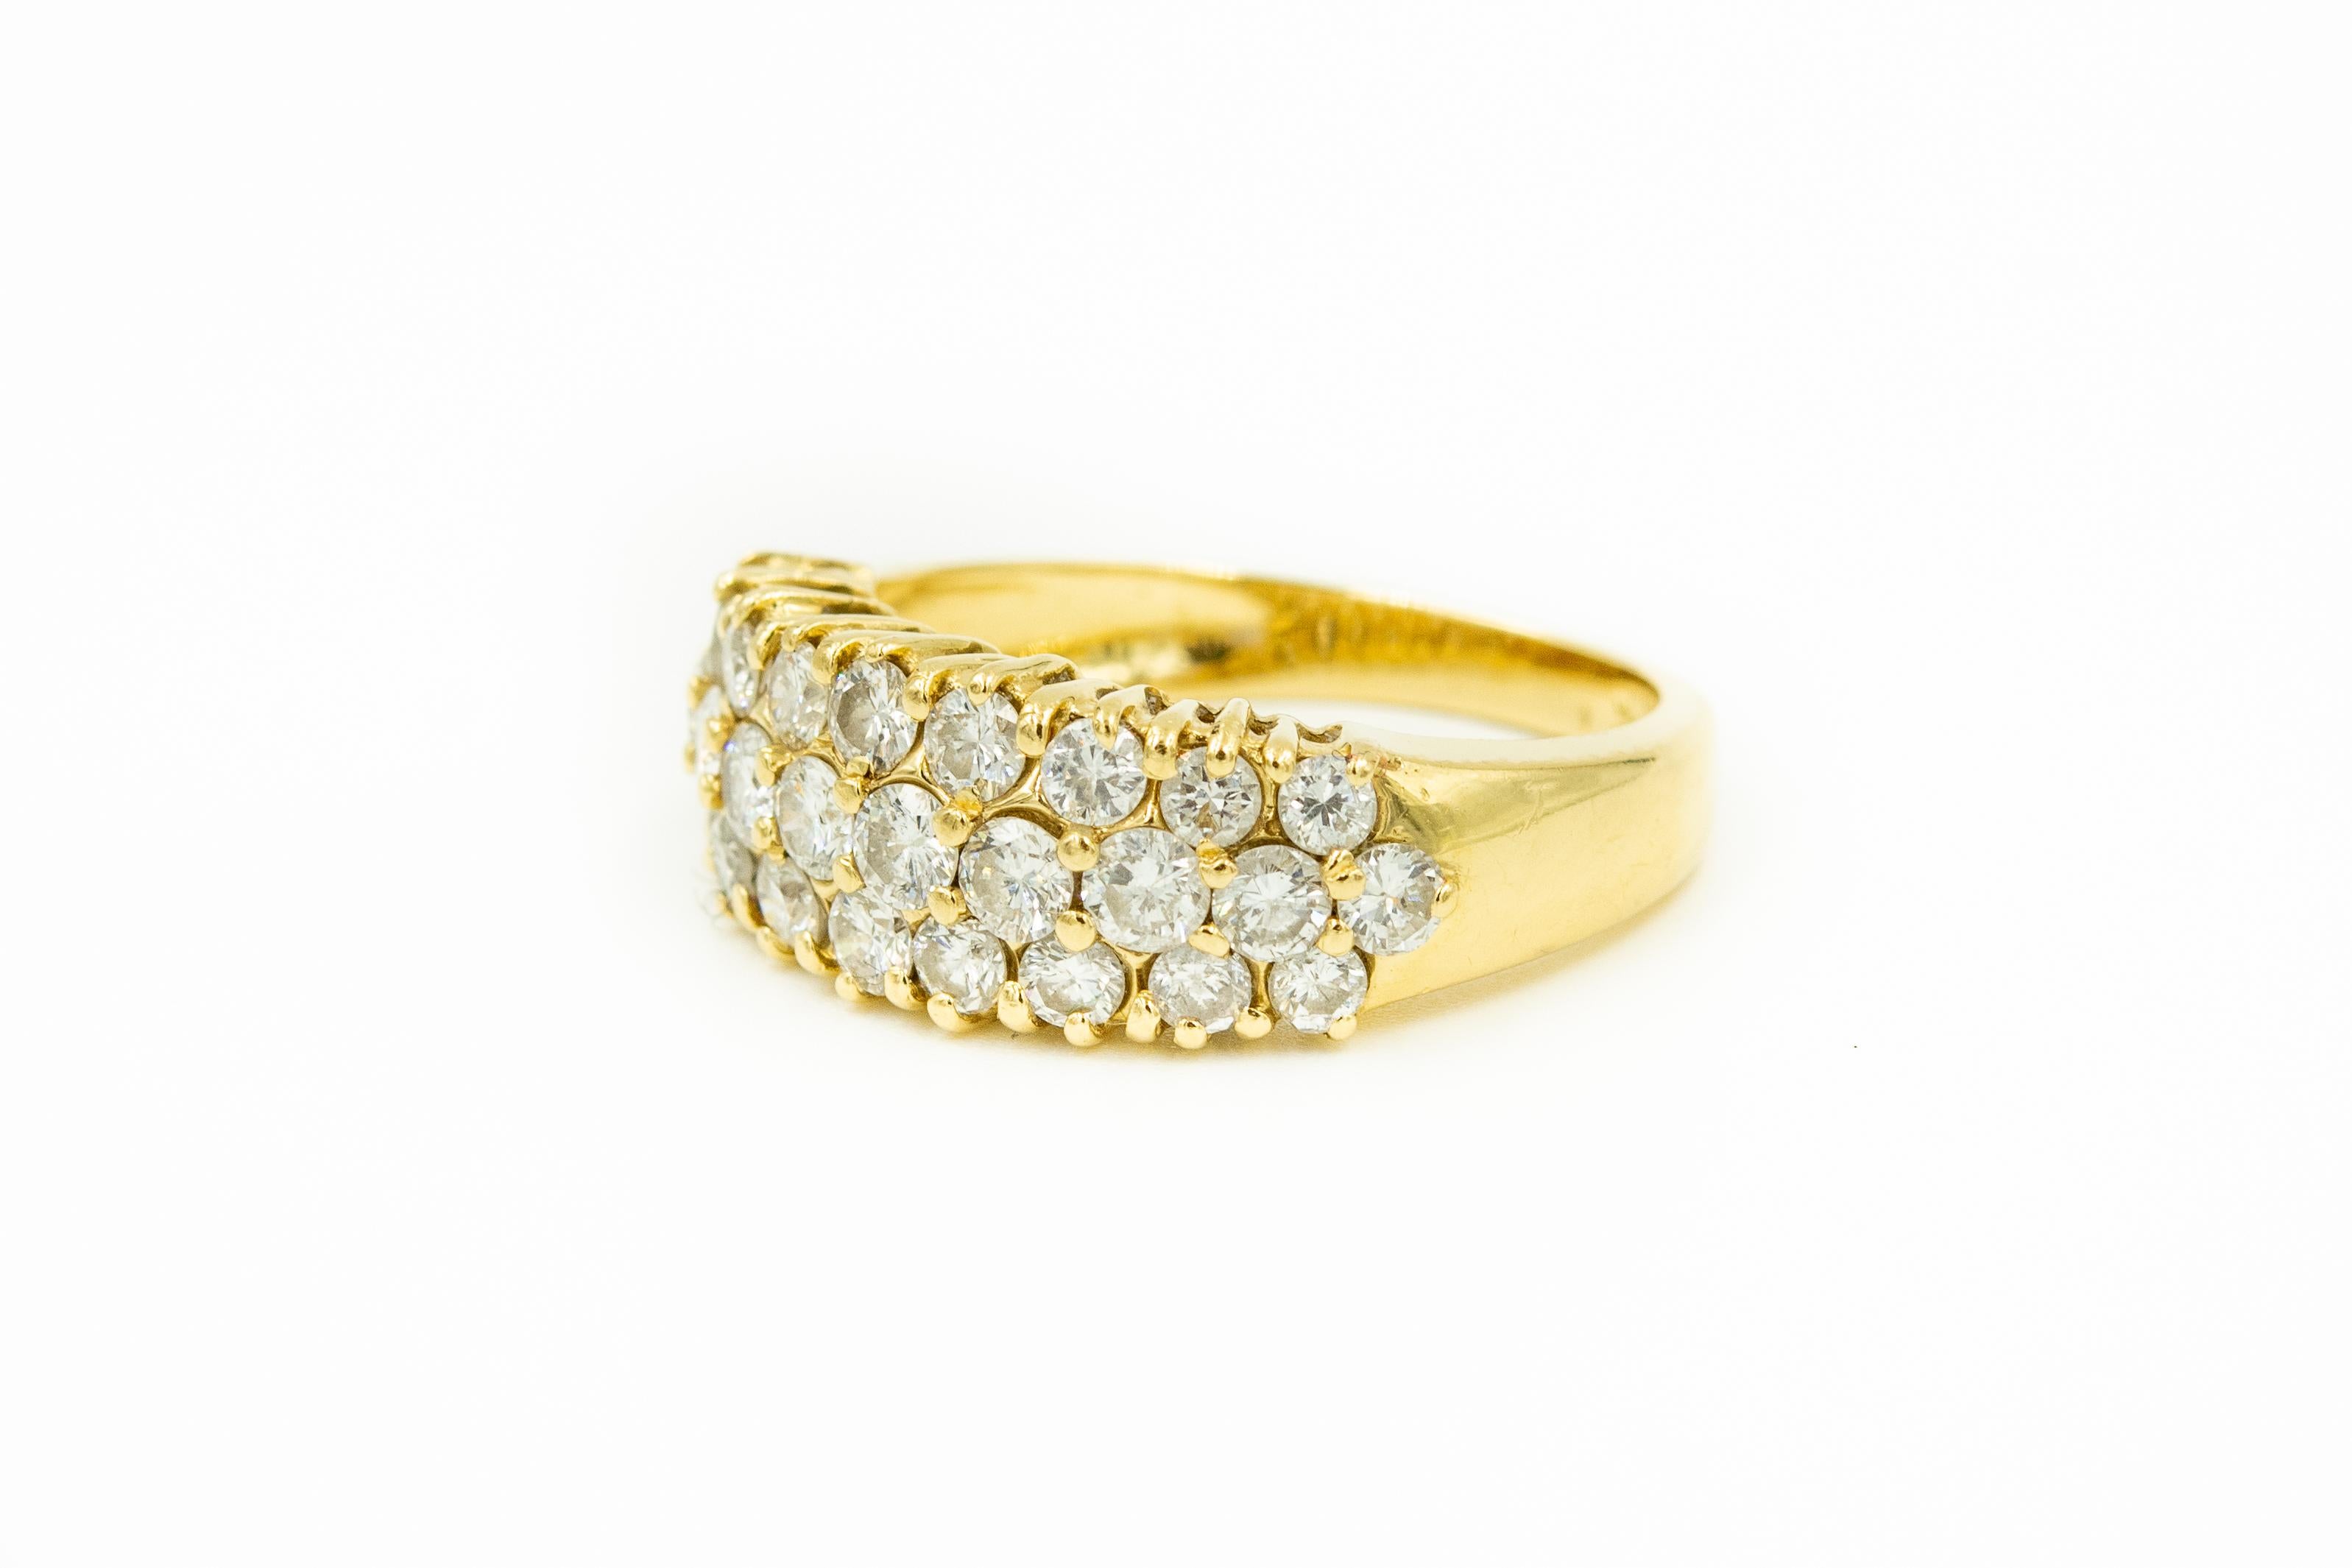 Simple elegance triple or three row diamond band ring made of 18k yellow gold ring containing 28 clean nice round brilliant diamonds with an approximate total weight of 1.40 carats.   The diamonds are only in the front which makes it easier to size